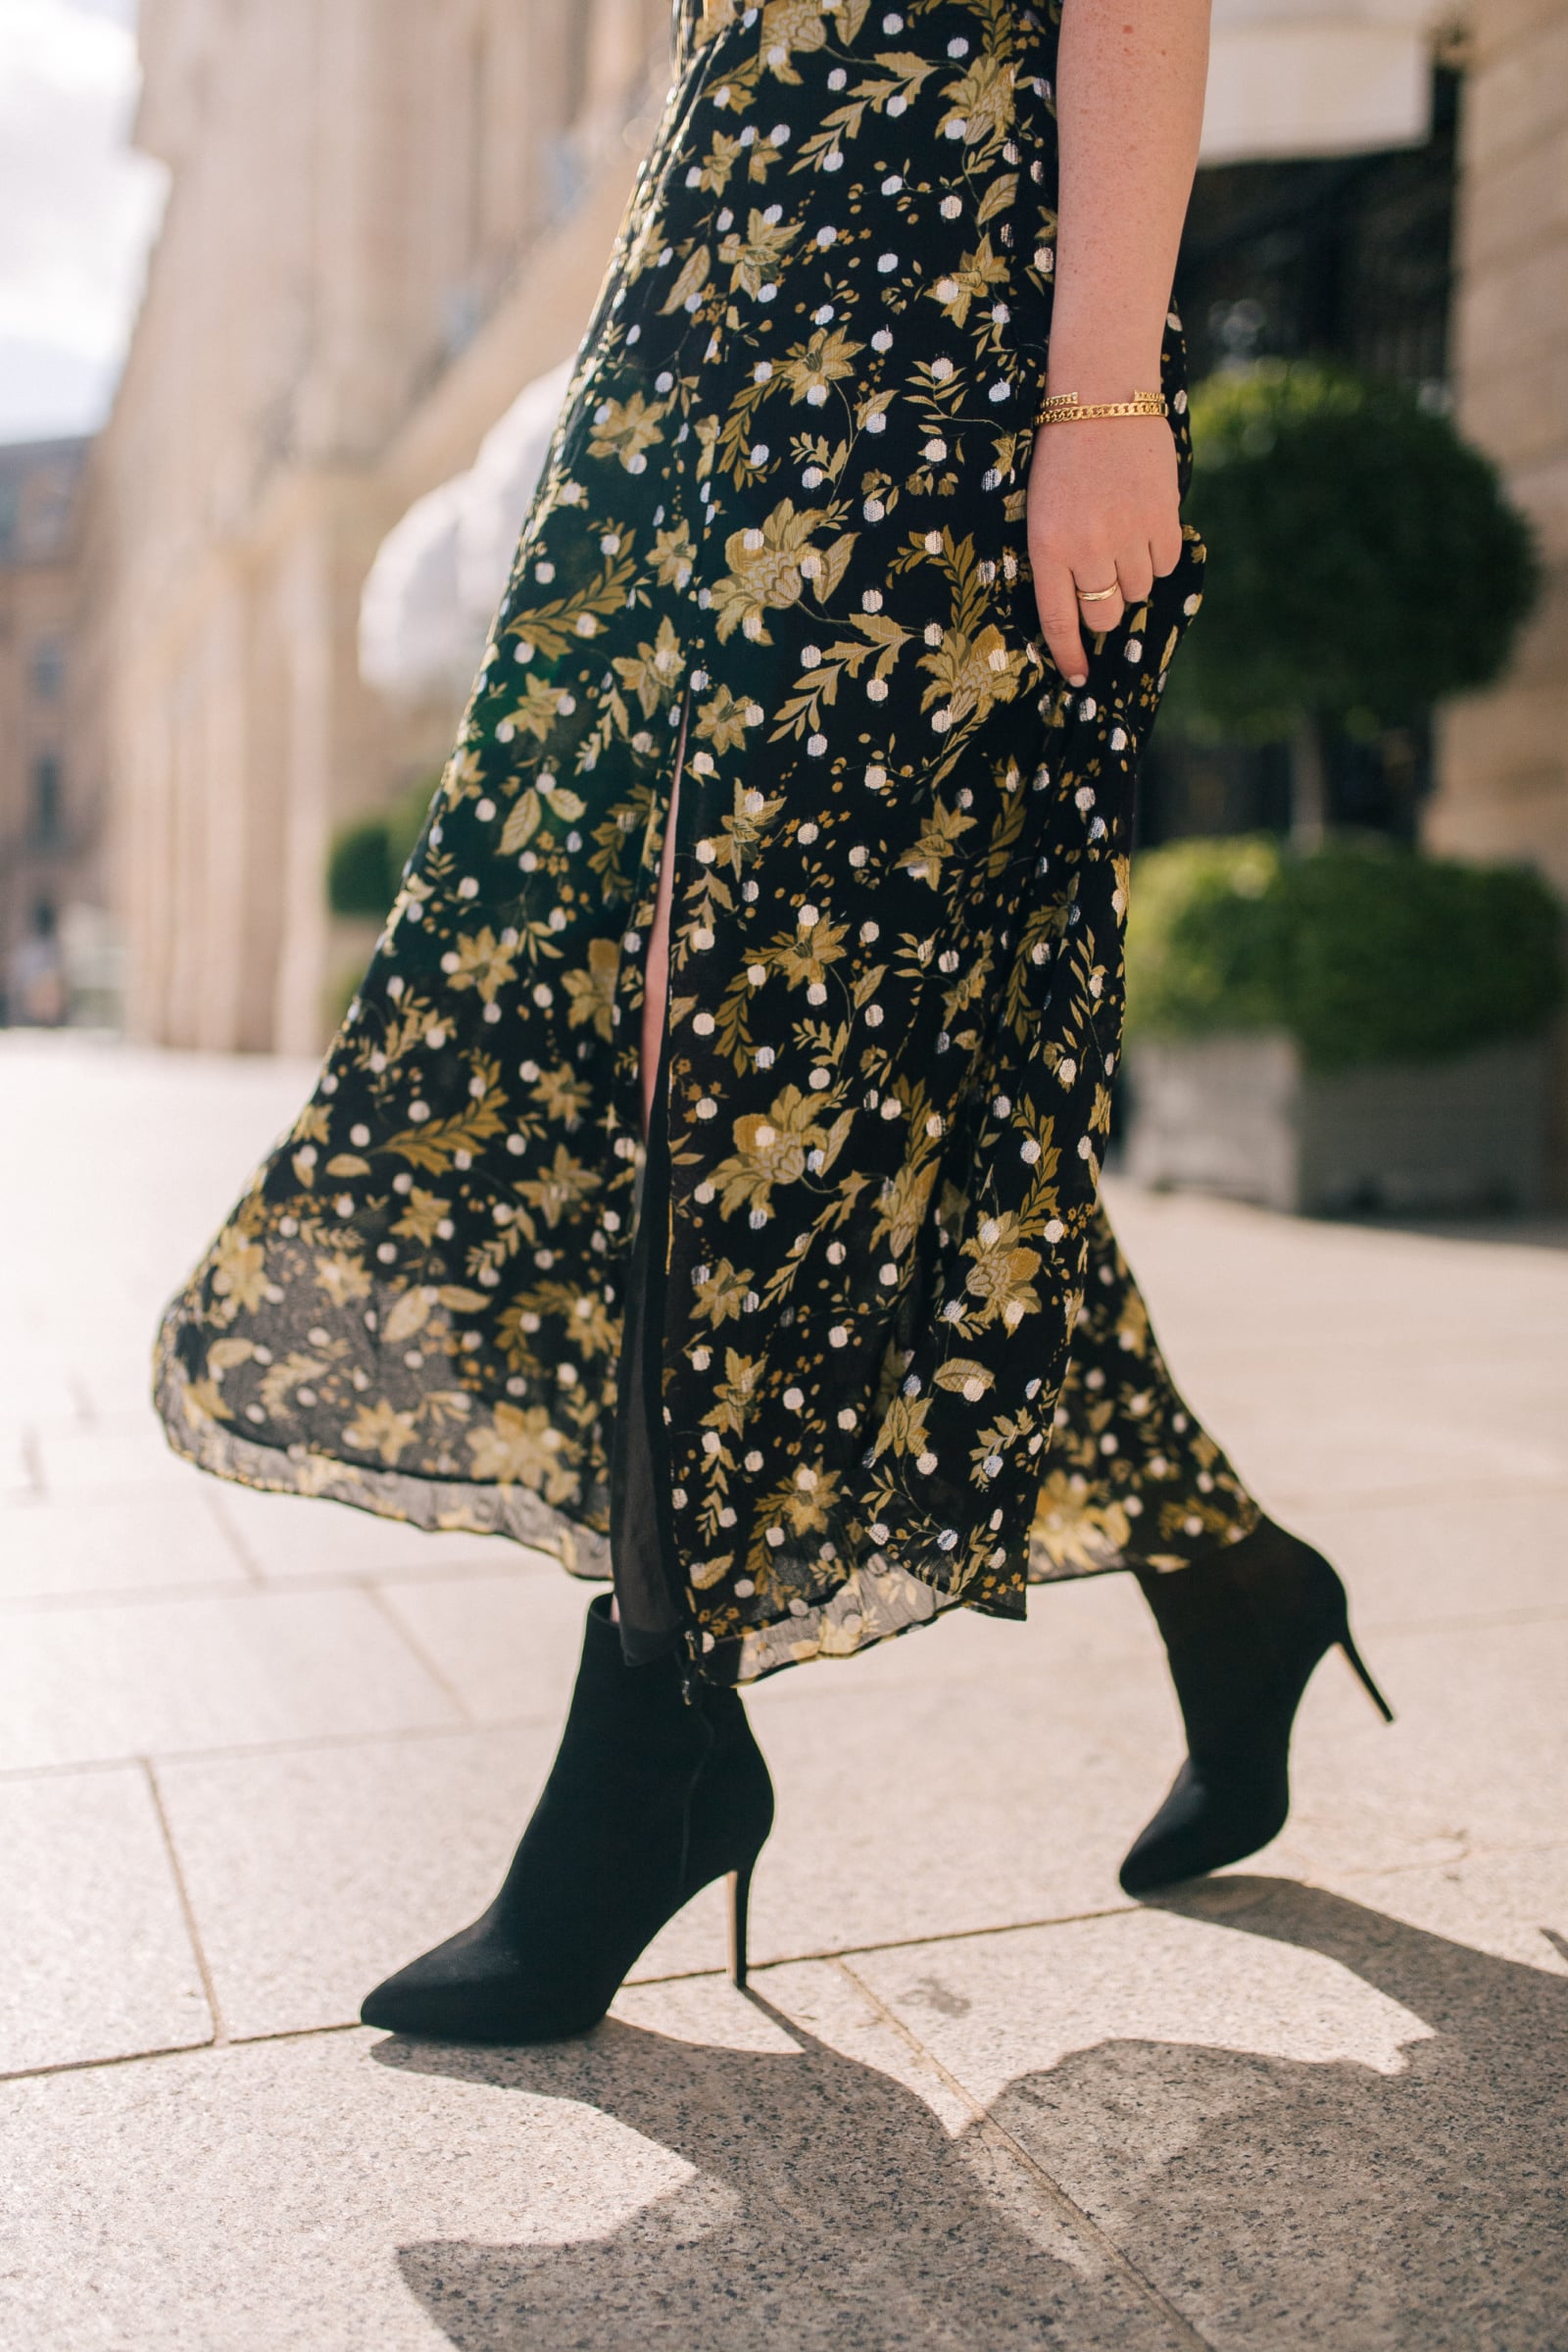 dress booties | Things in My Closet I Can't Wait to Wear This Fall